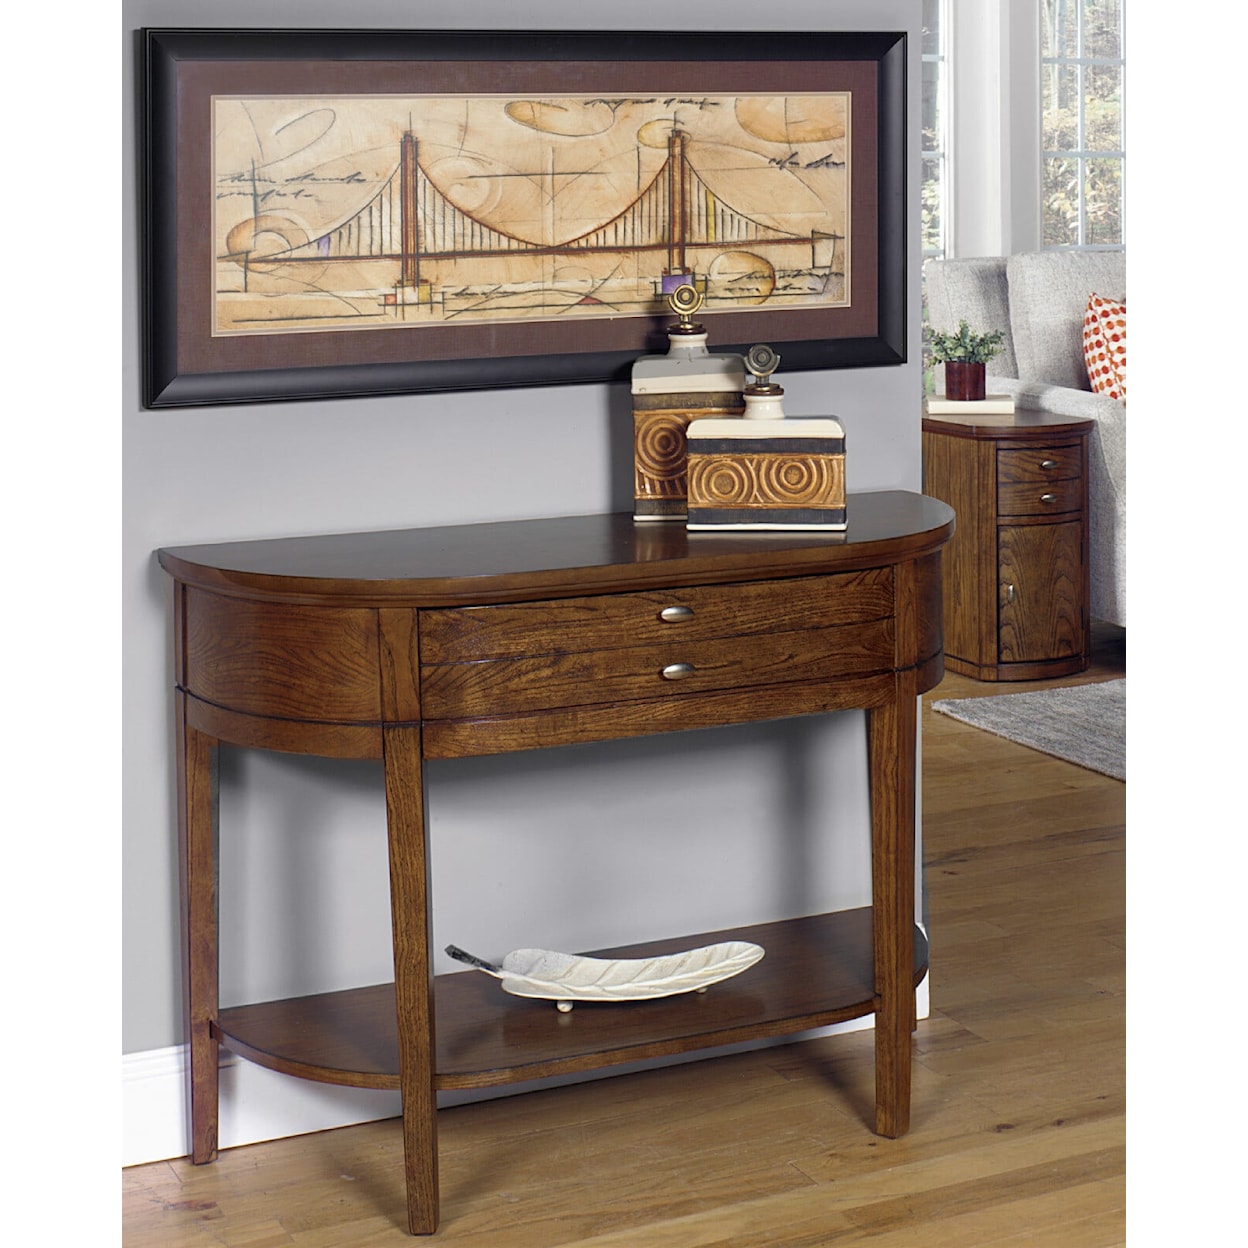 Null Furniture 2016 - Newport Console Table